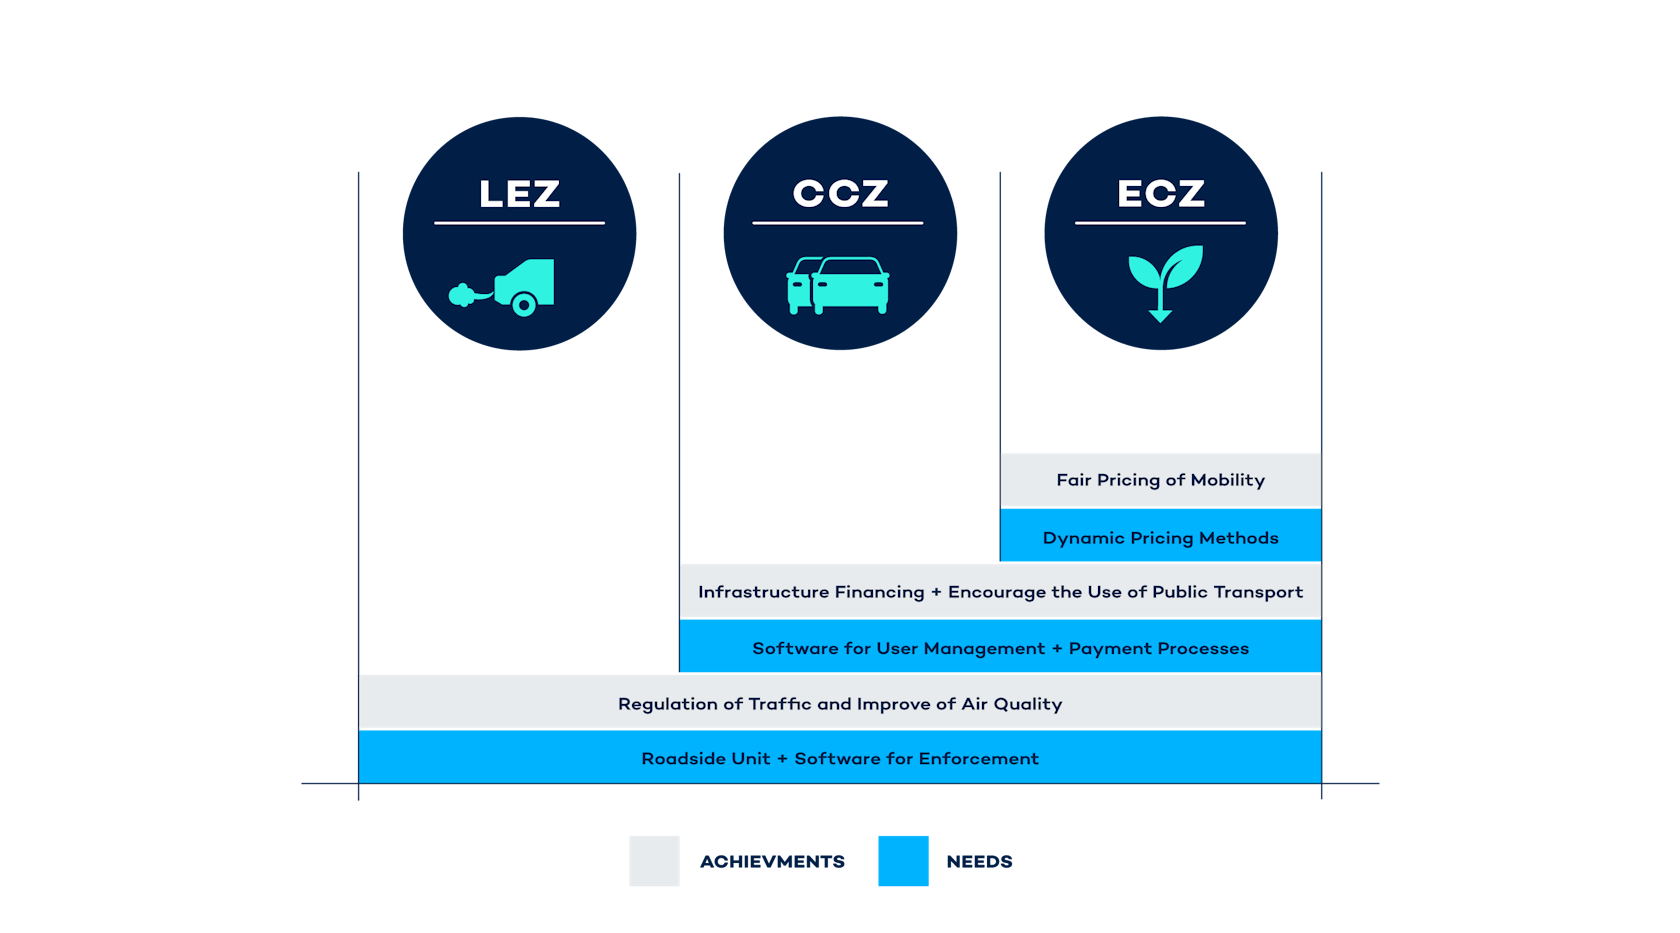 The difference between low emission zones, congestion charging zones and environmental zones